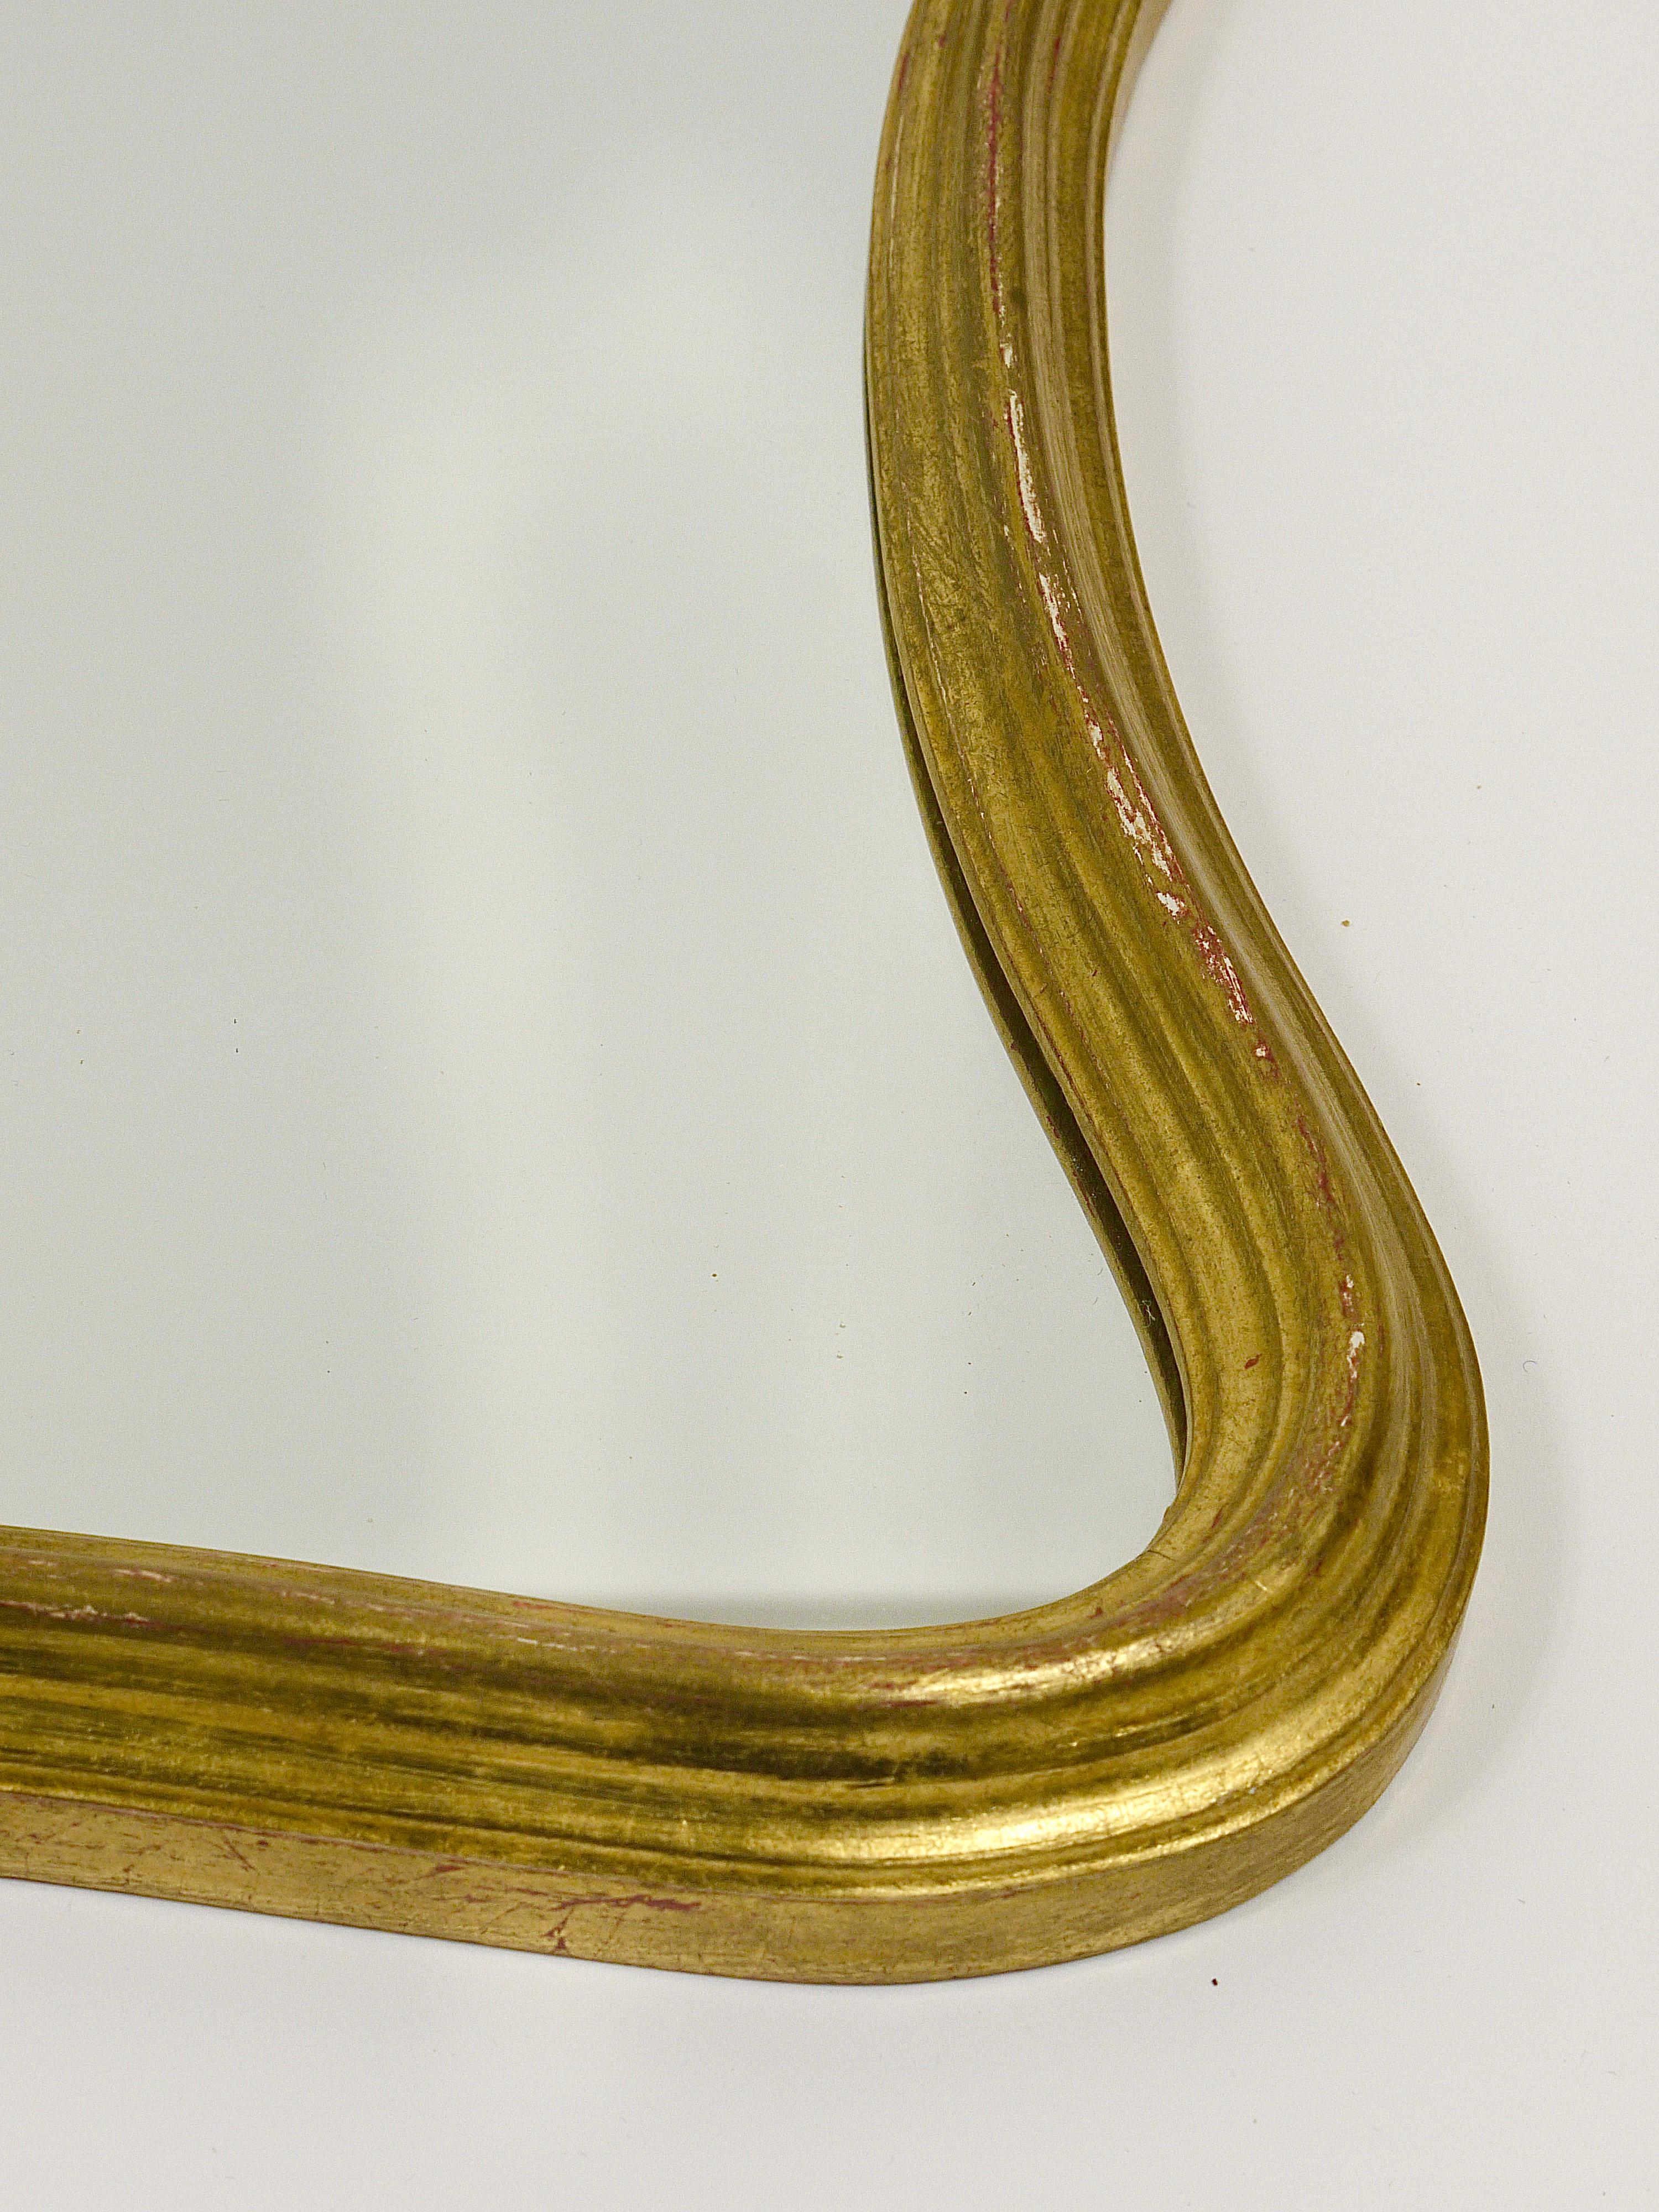 20th Century Chelini Firenze Curved Gilt Wood Mid-Century Wall Mirror, Italy, 1950s For Sale